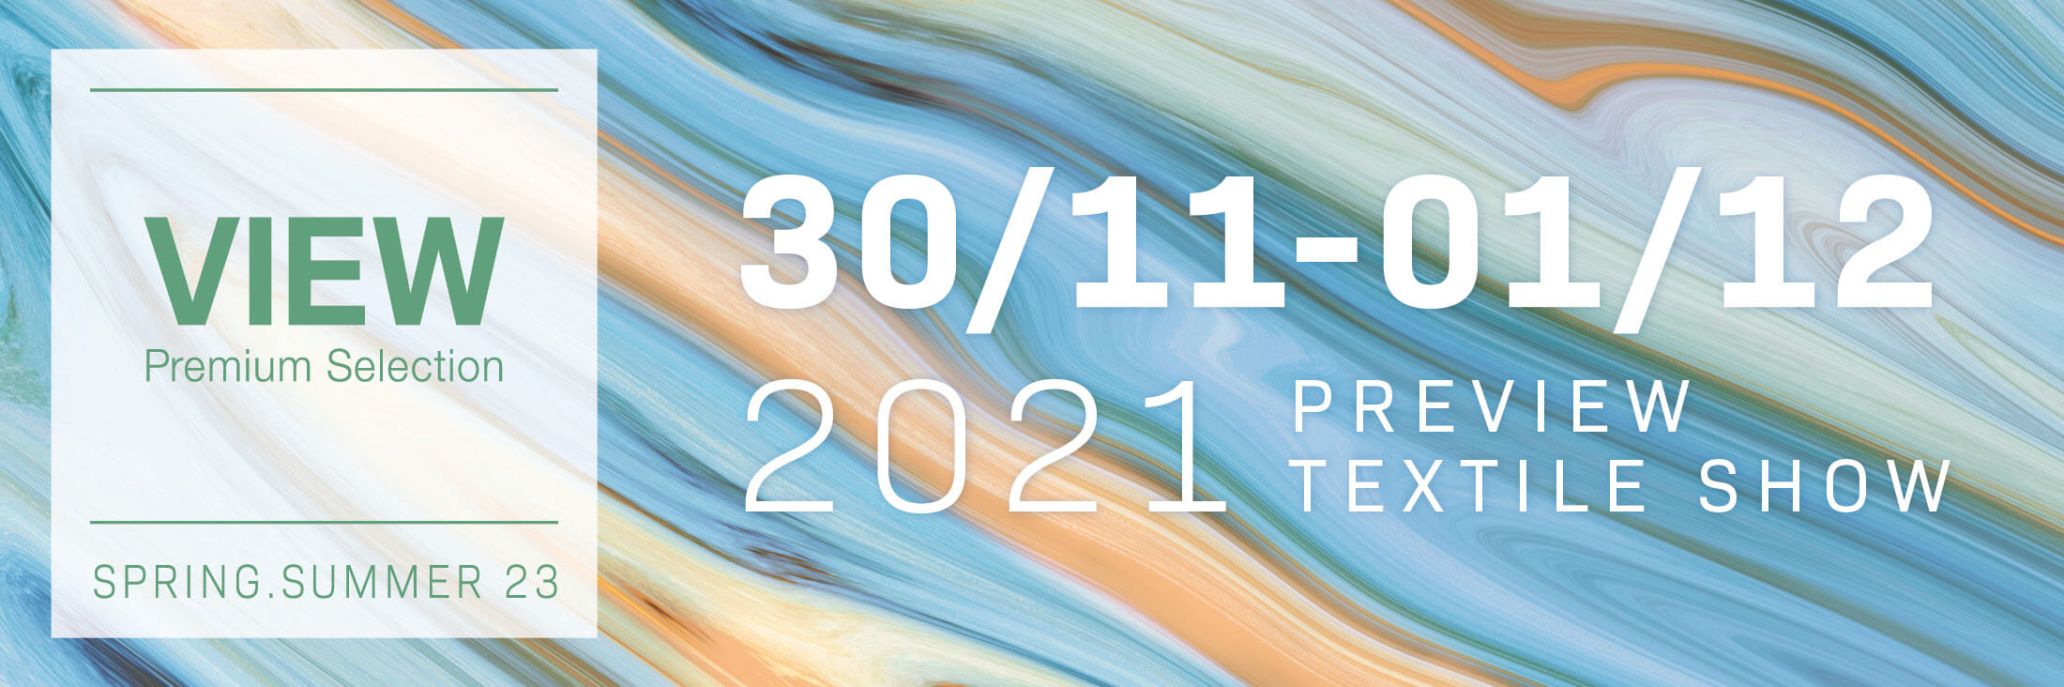 The Preview Textile Trade Show ‘VIEW’ will be held on November 30th and December 1st, 2021